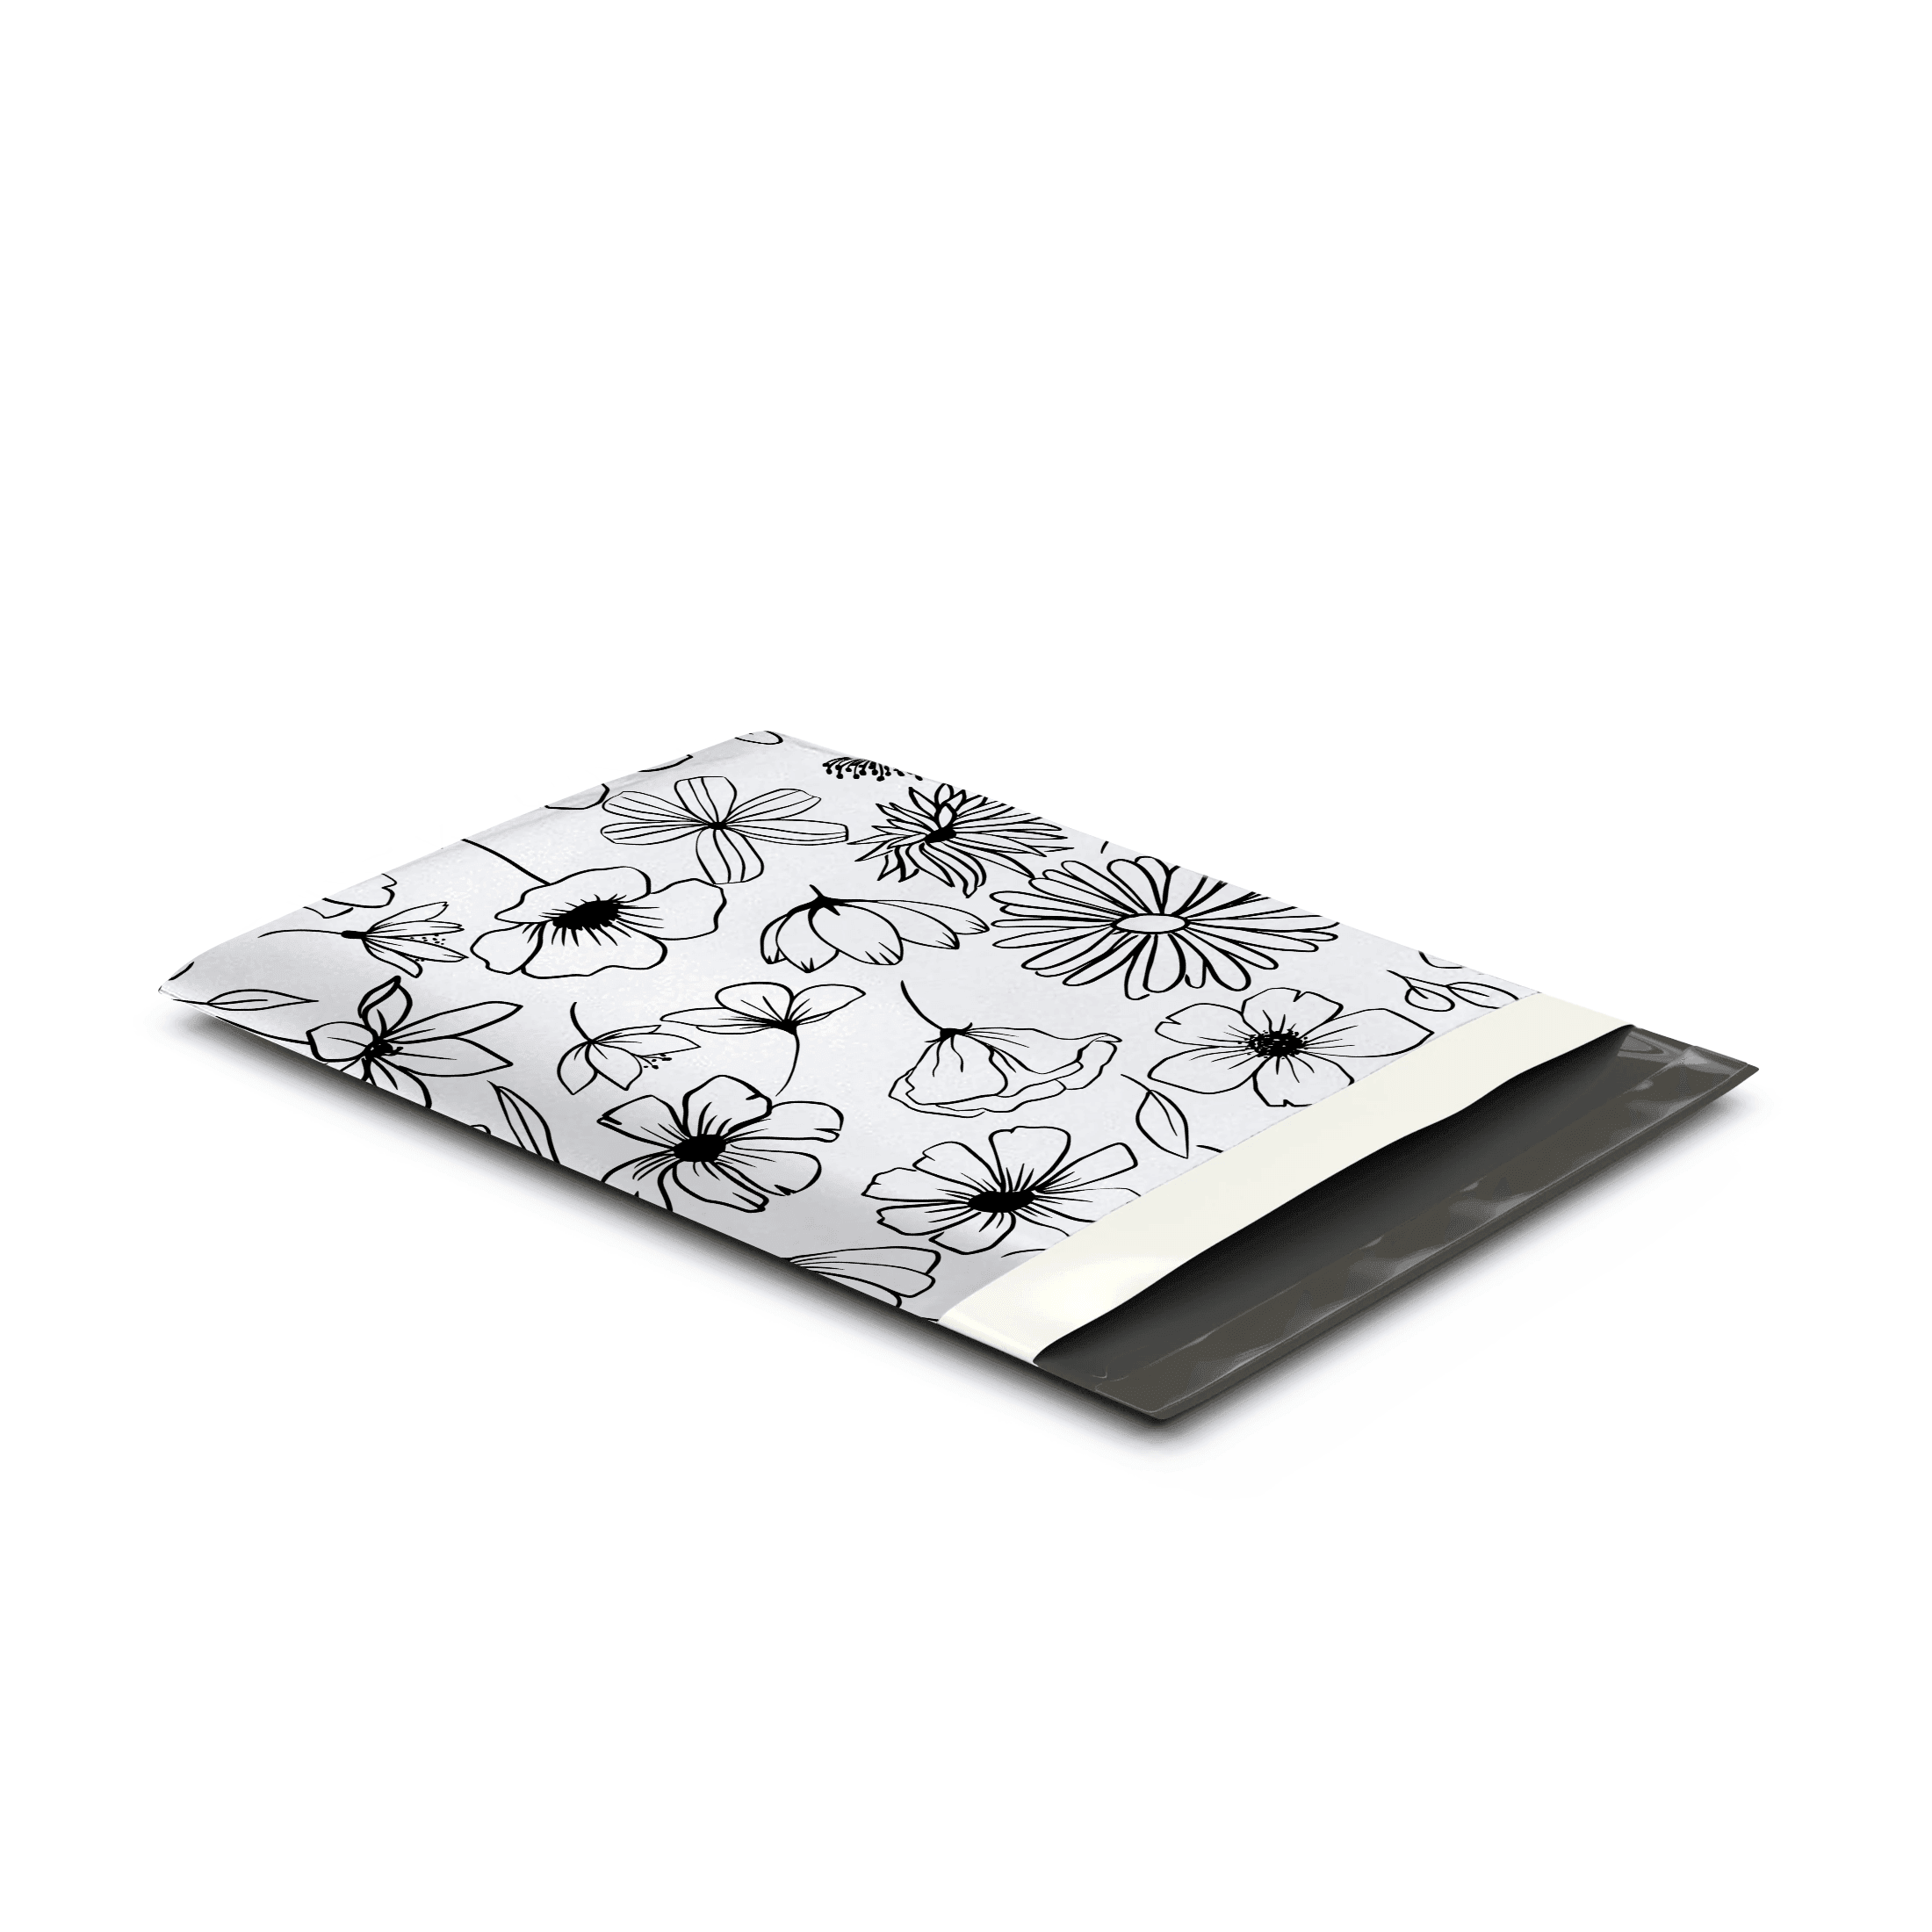 10x13 (100) Black and White Sketched Floral Designer Poly Mailers Shipping Envelopes Premium Printed Bags